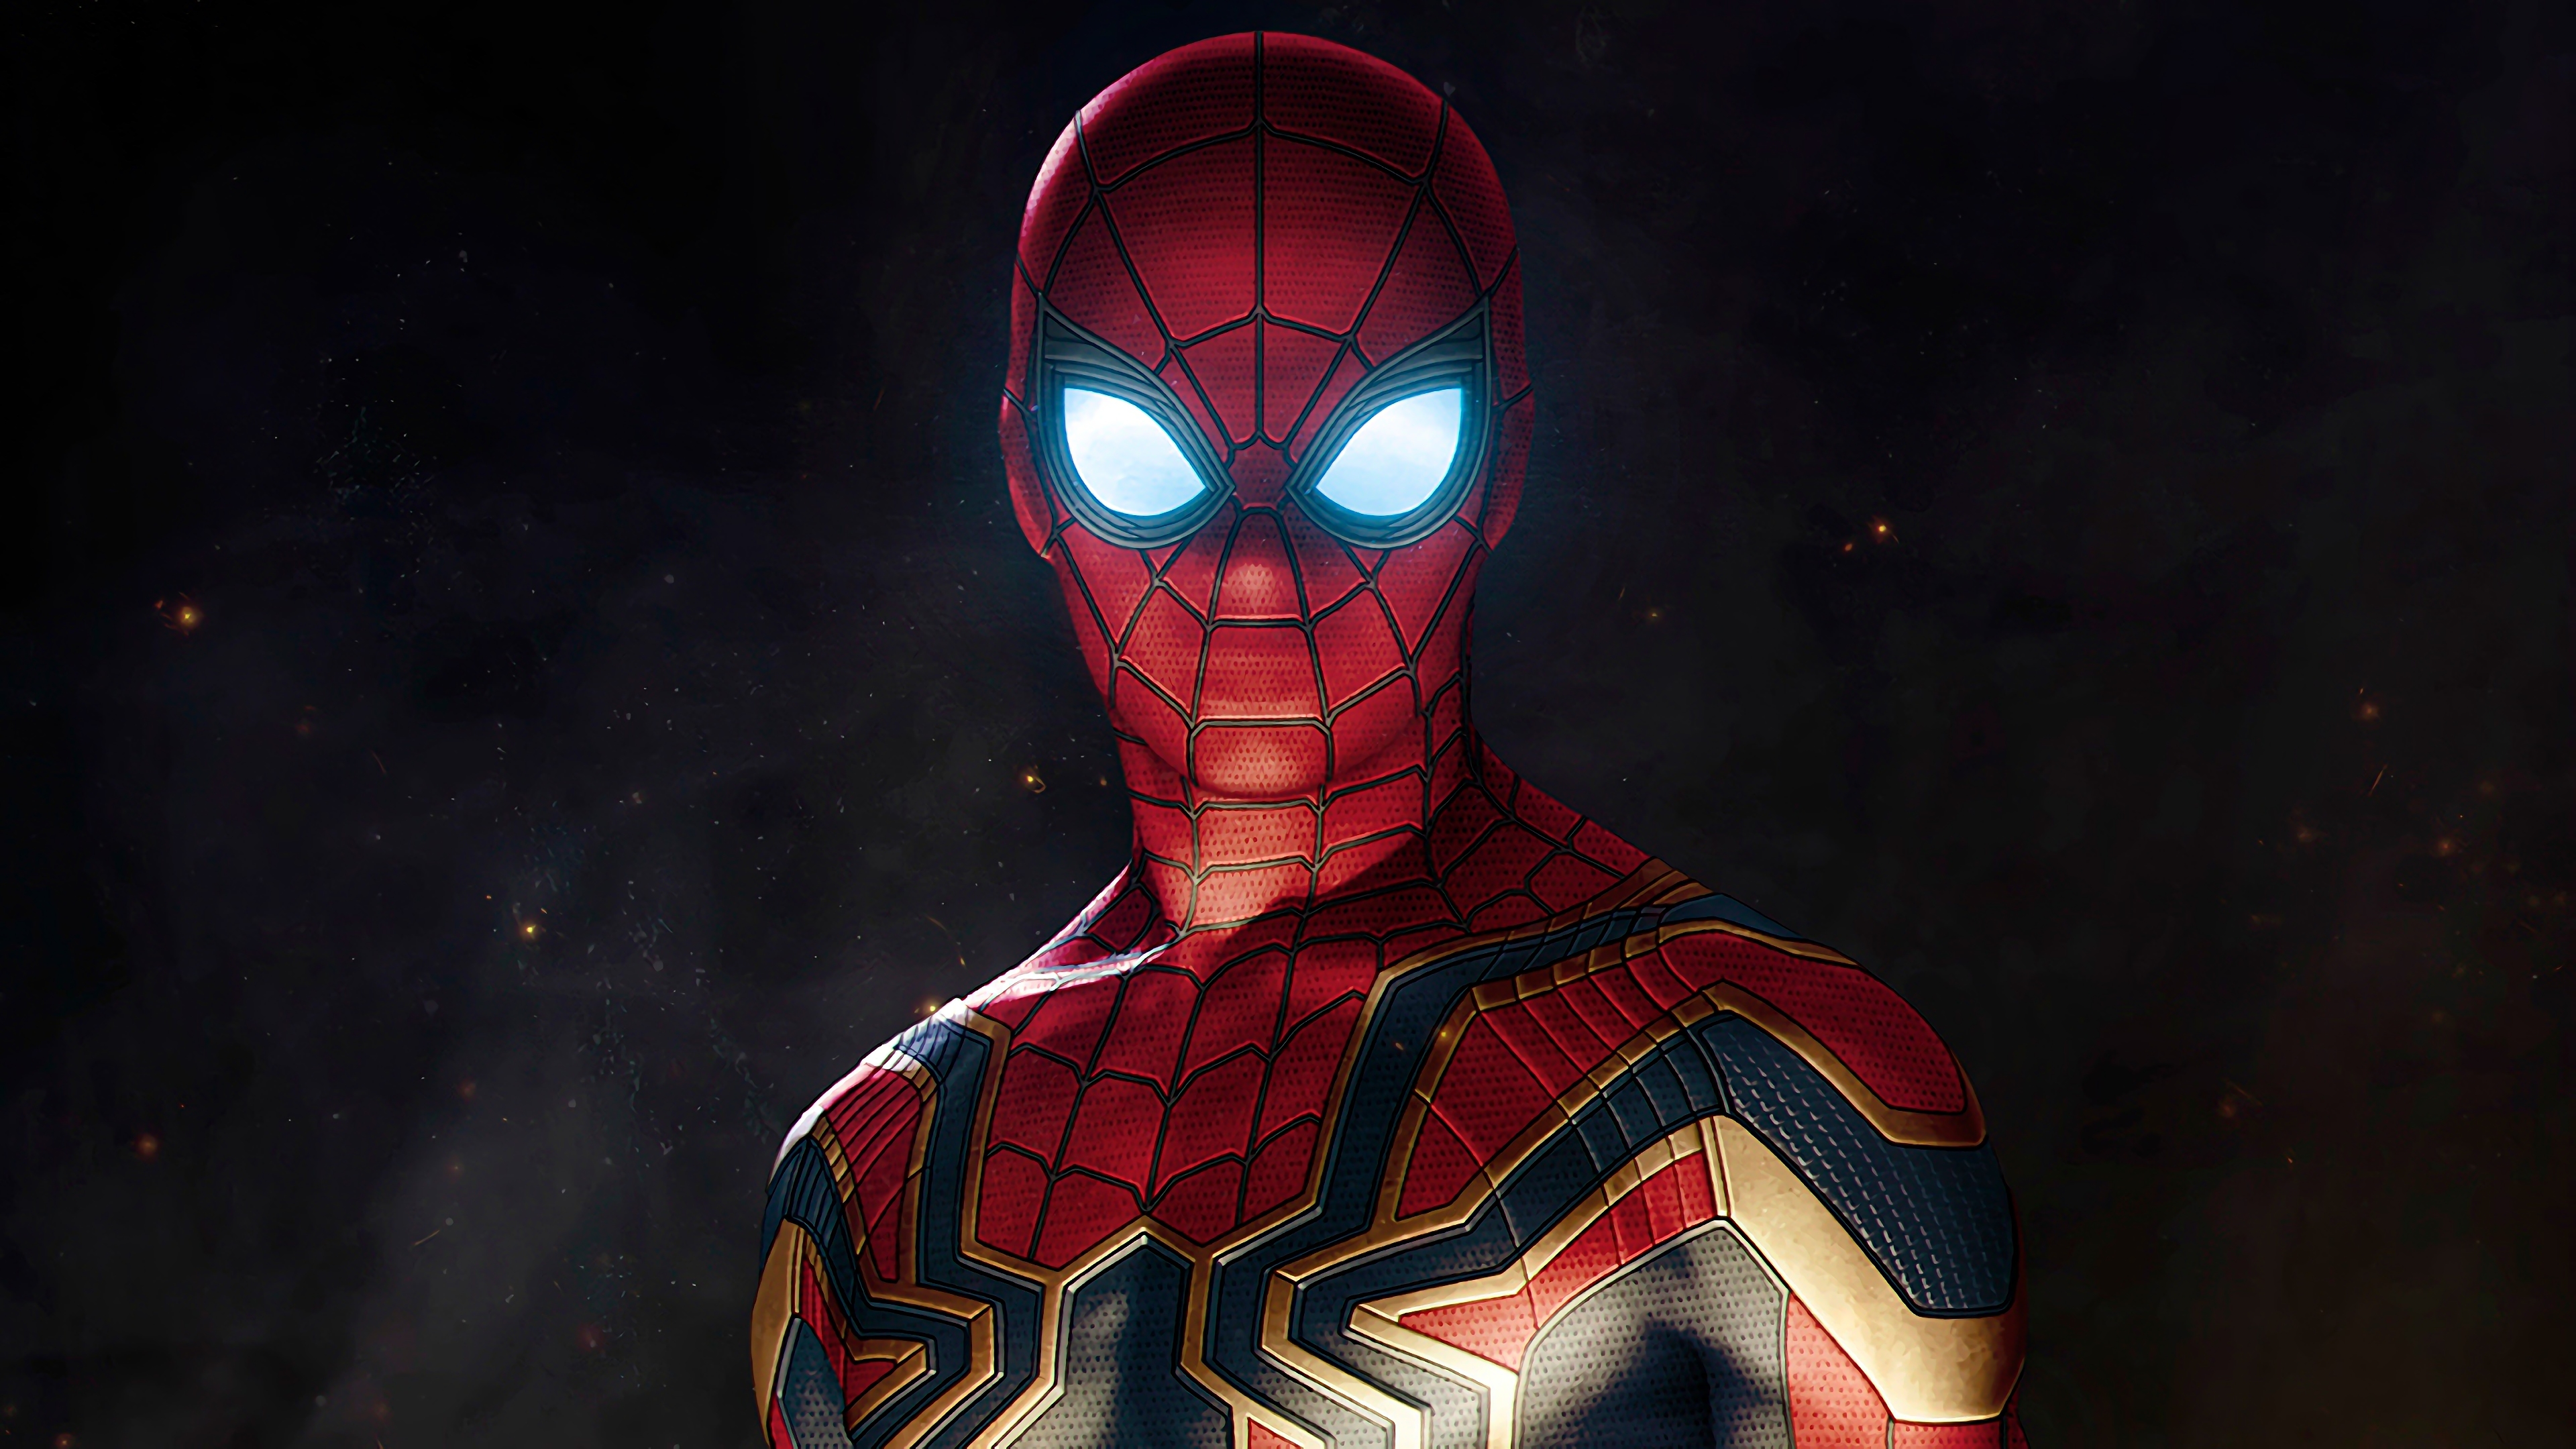 spider man, avengers: infinity war, movie, peter parker, glowing eyes, the avengers